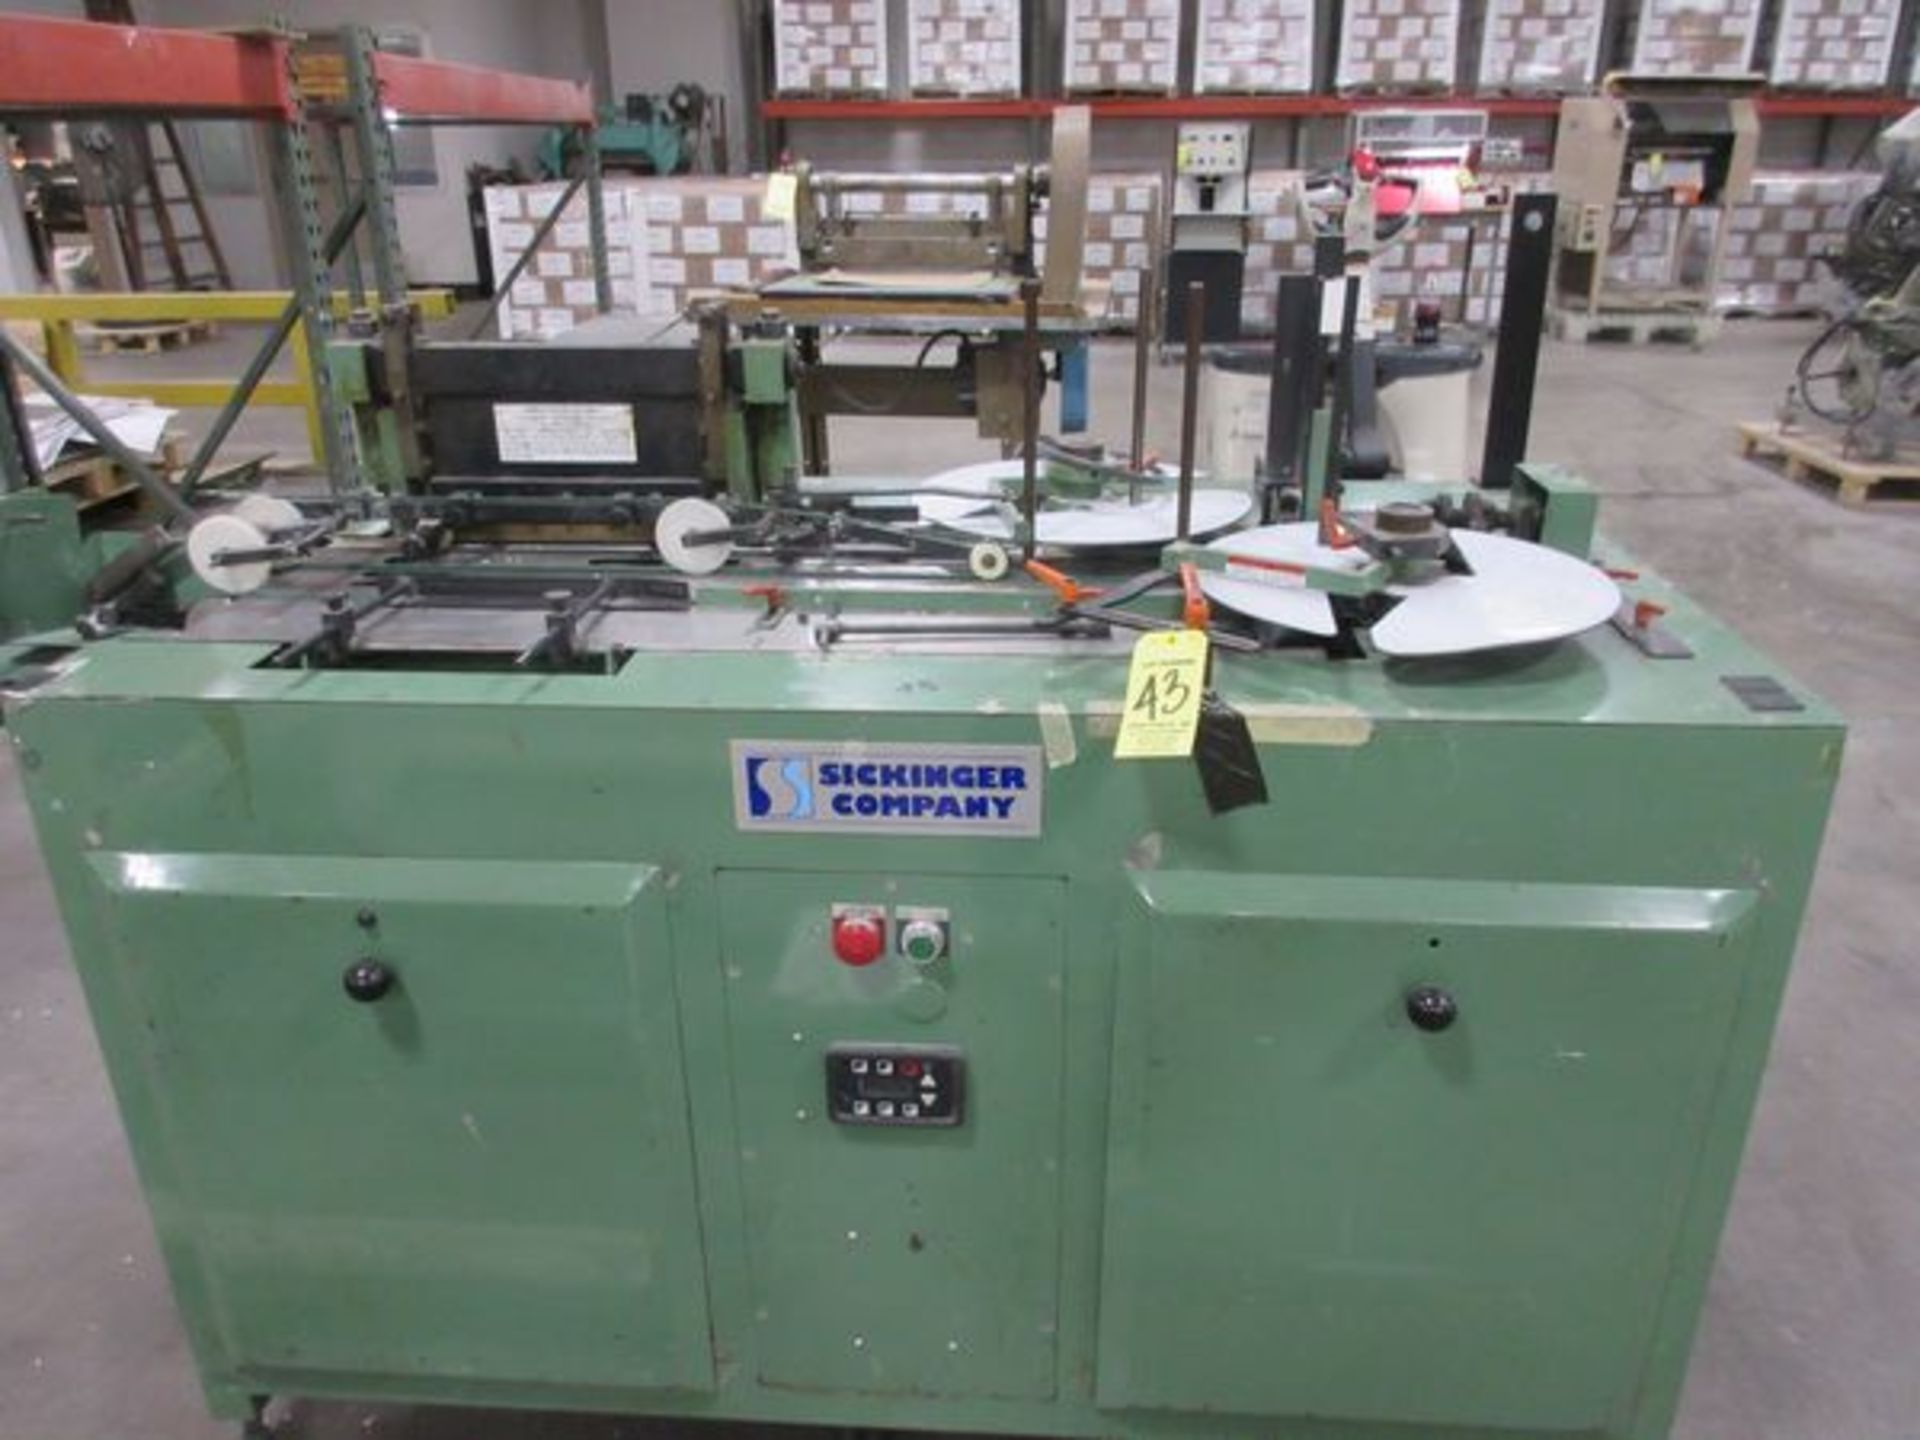 Sickinger ASP13 Dual Disc Auto Feed Paper Punch, s/n 893